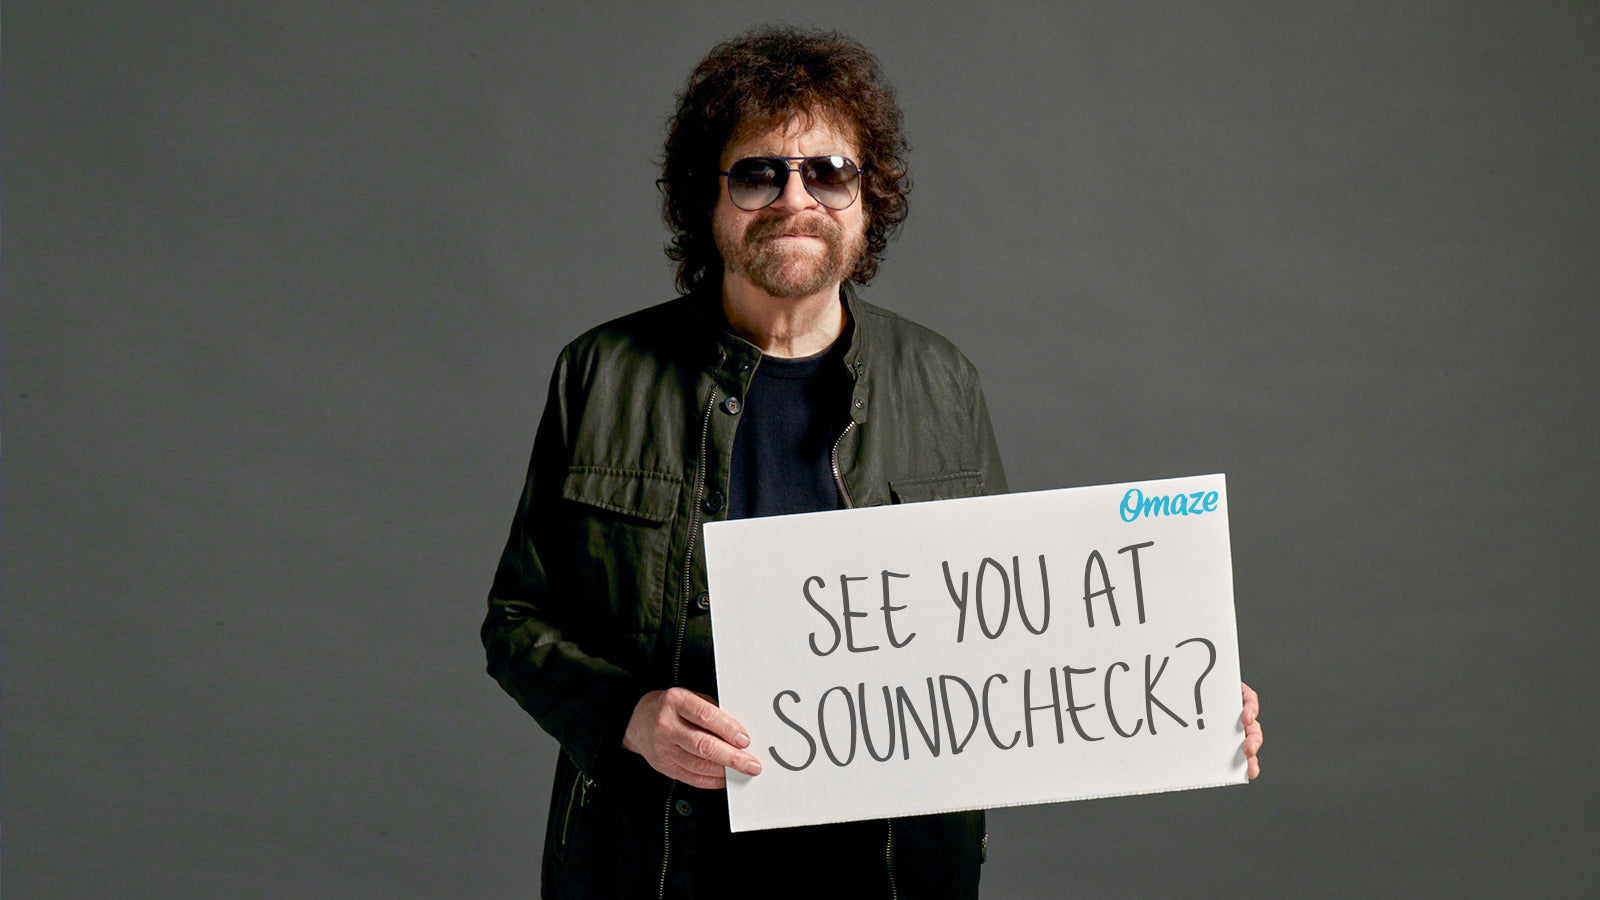 Score VIP Tickets to See Jeff Lynne’s ELO and Meet Jeff at Soundcheck